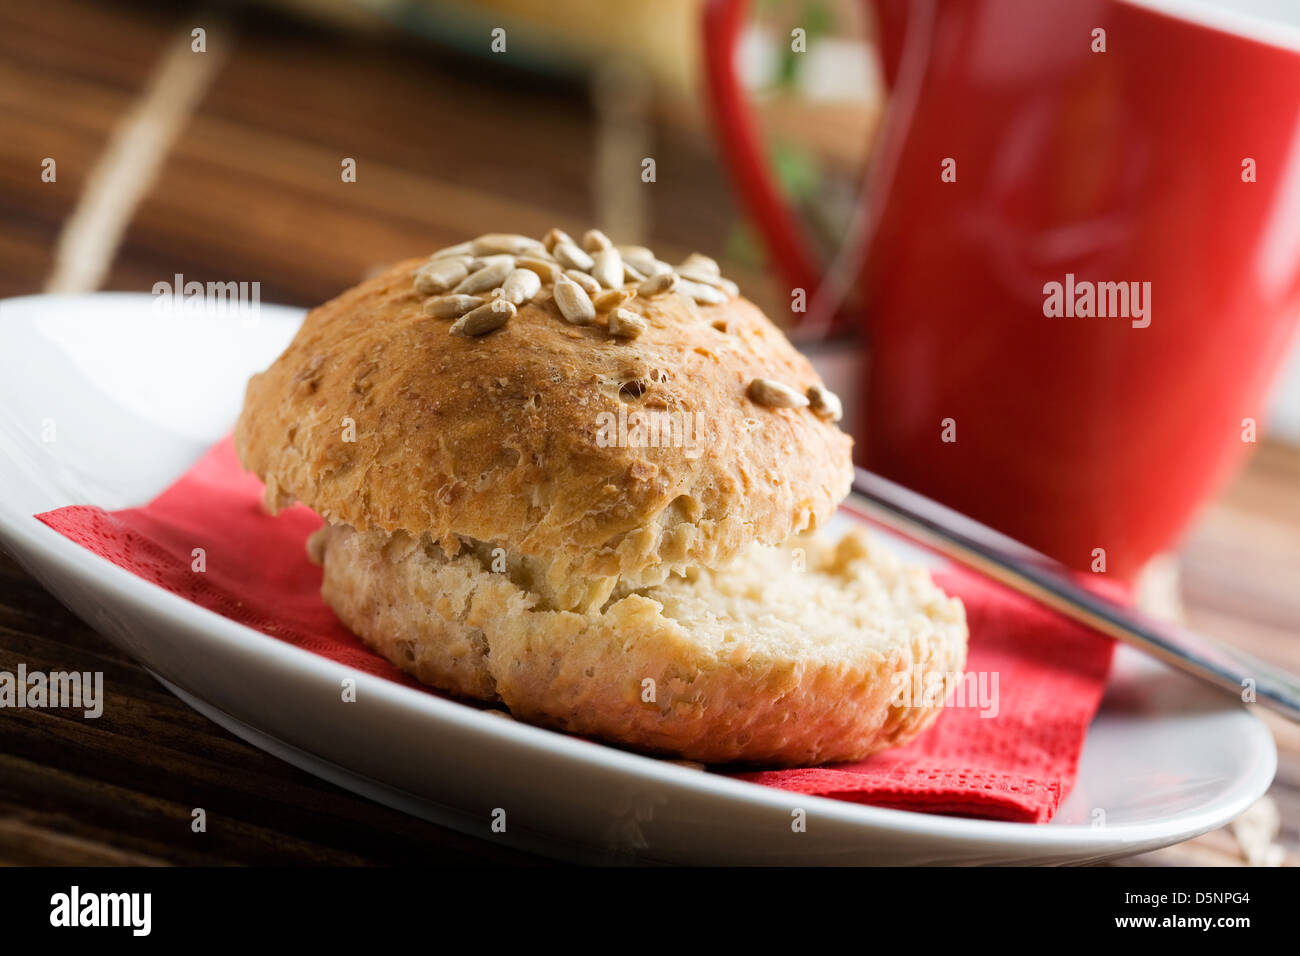 Homemade bread rolls with sonflower seeds Stock Photo